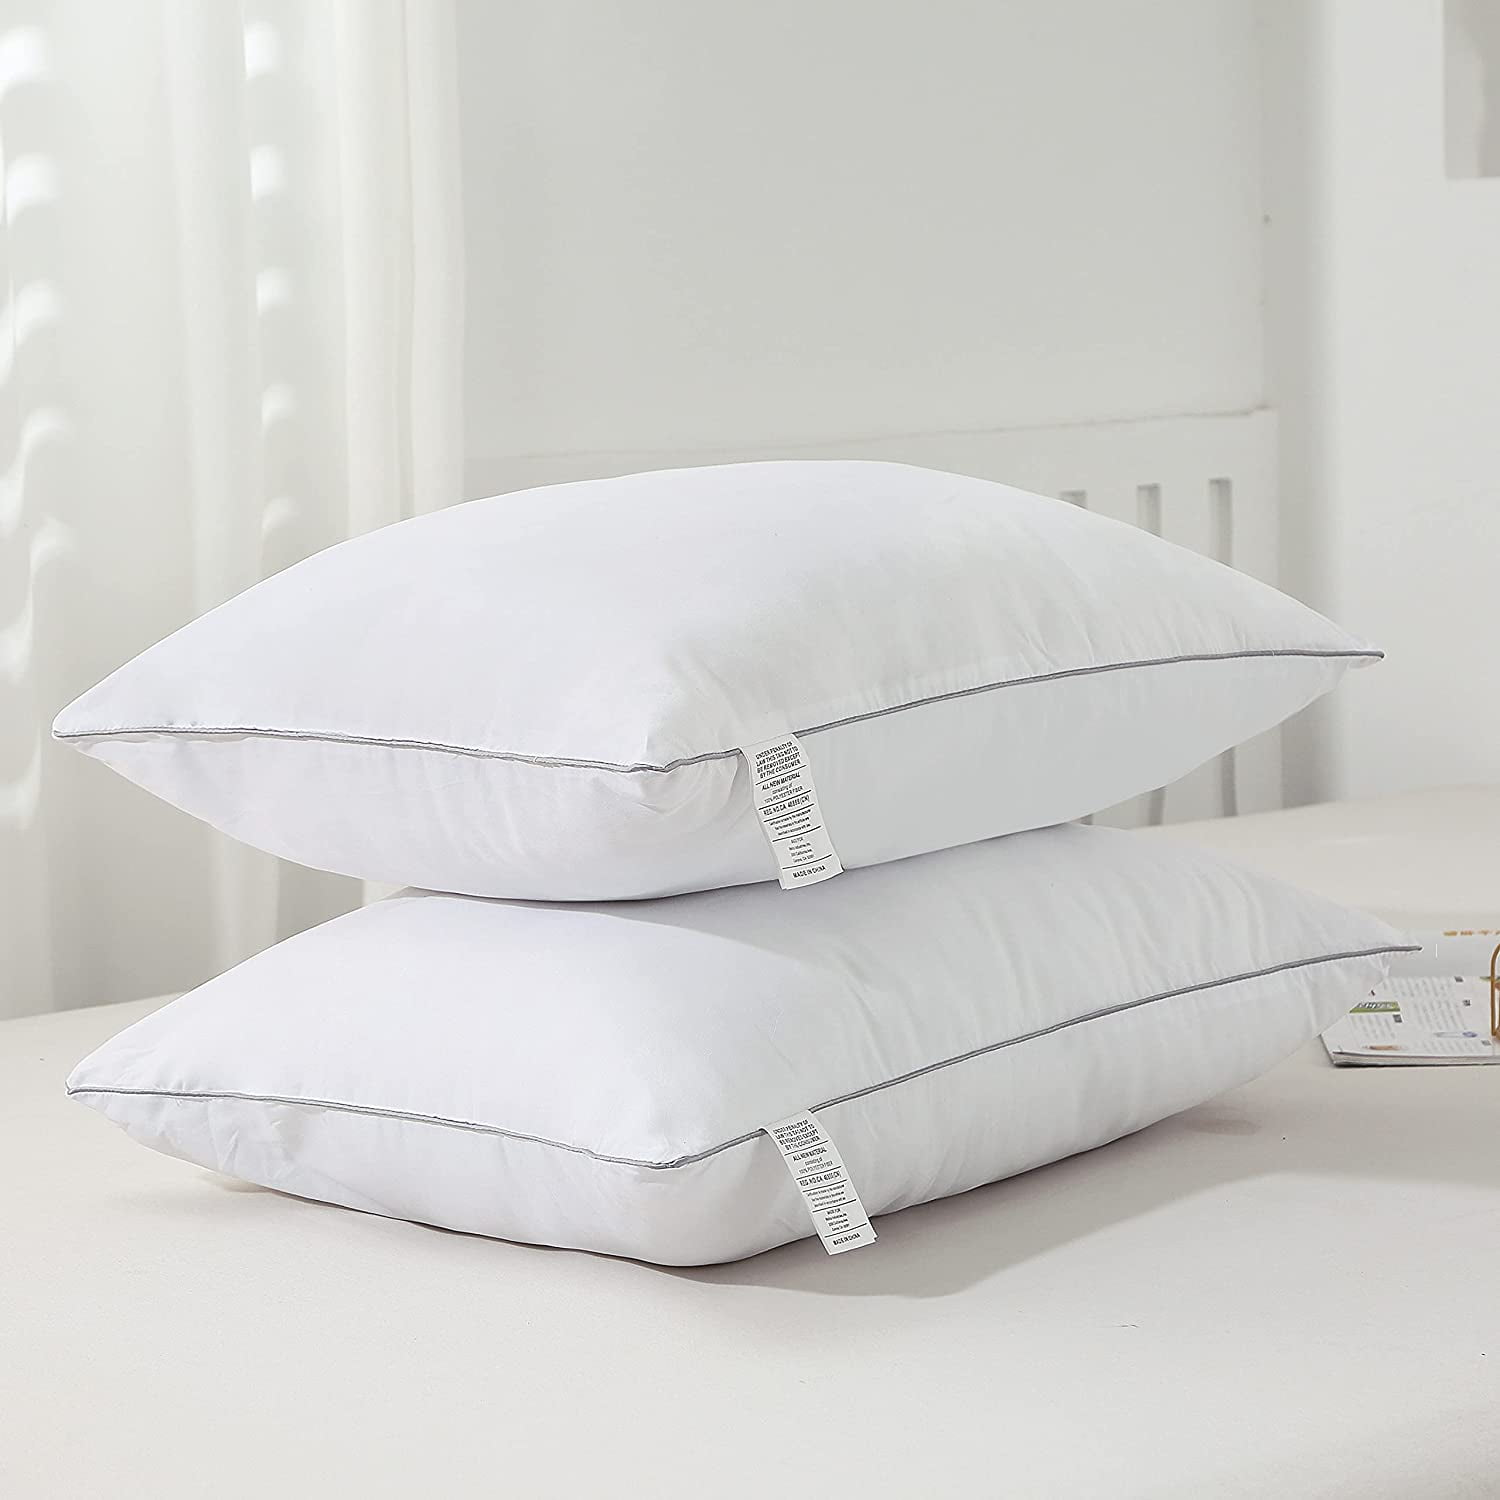 Details about   My Pillow Classic Lot of 2 pillows MyPillow 